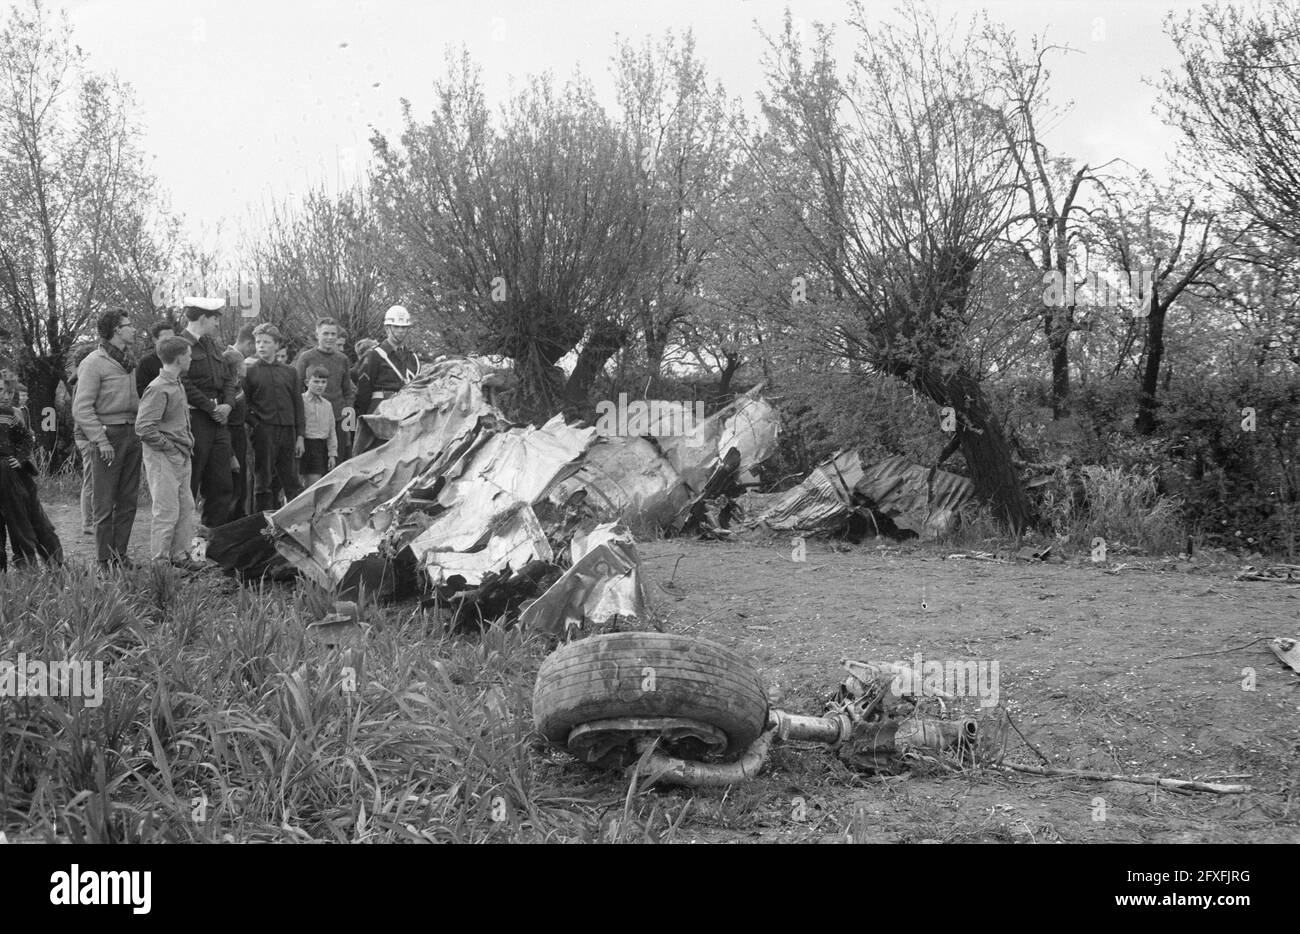 Two Danish fighter jets in collision over Betuwe. Crashed plane near Valburg, April 17, 1961, collisions, jet fighters, aircraft, The Netherlands, 20th century press agency photo, news to remember, documentary, historic photography 1945-1990, visual stories, human history of the Twentieth Century, capturing moments in time Stock Photo